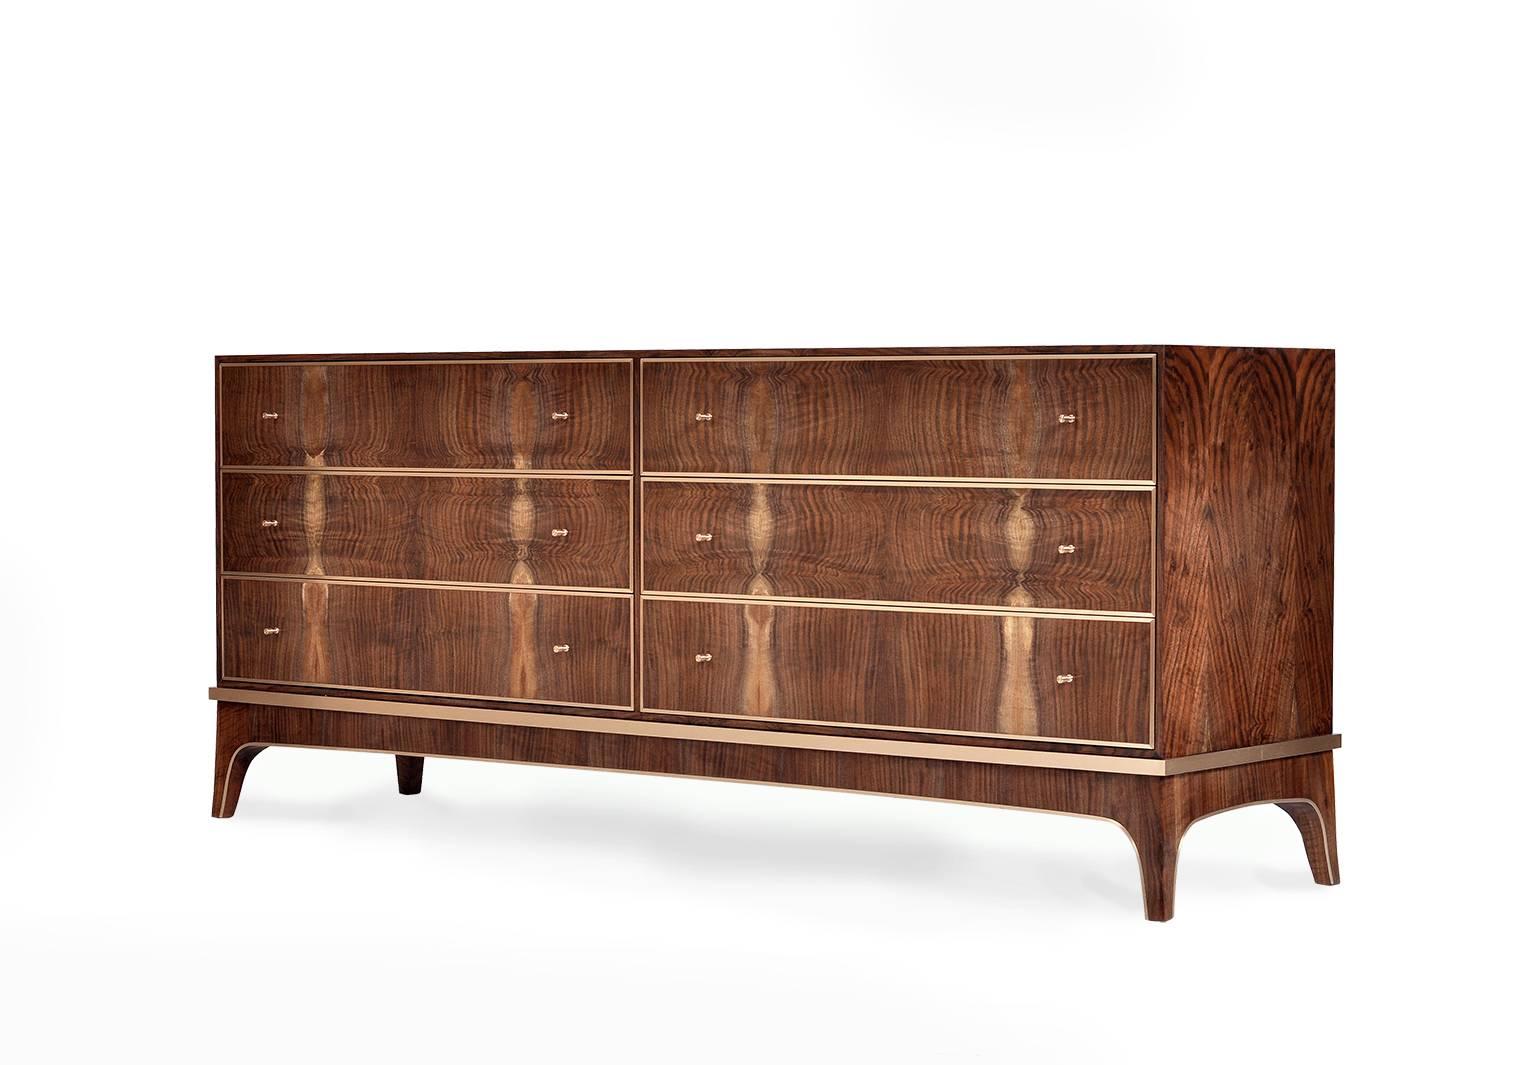 The Reve dresser in Bastogne walnut and bronze is a beautiful, rich example of modern elegance. 

This six-drawer piece is made using our shop sawn veneer, giving a thickness and authentic luxury that most modern furniture cannot boast. We carefully